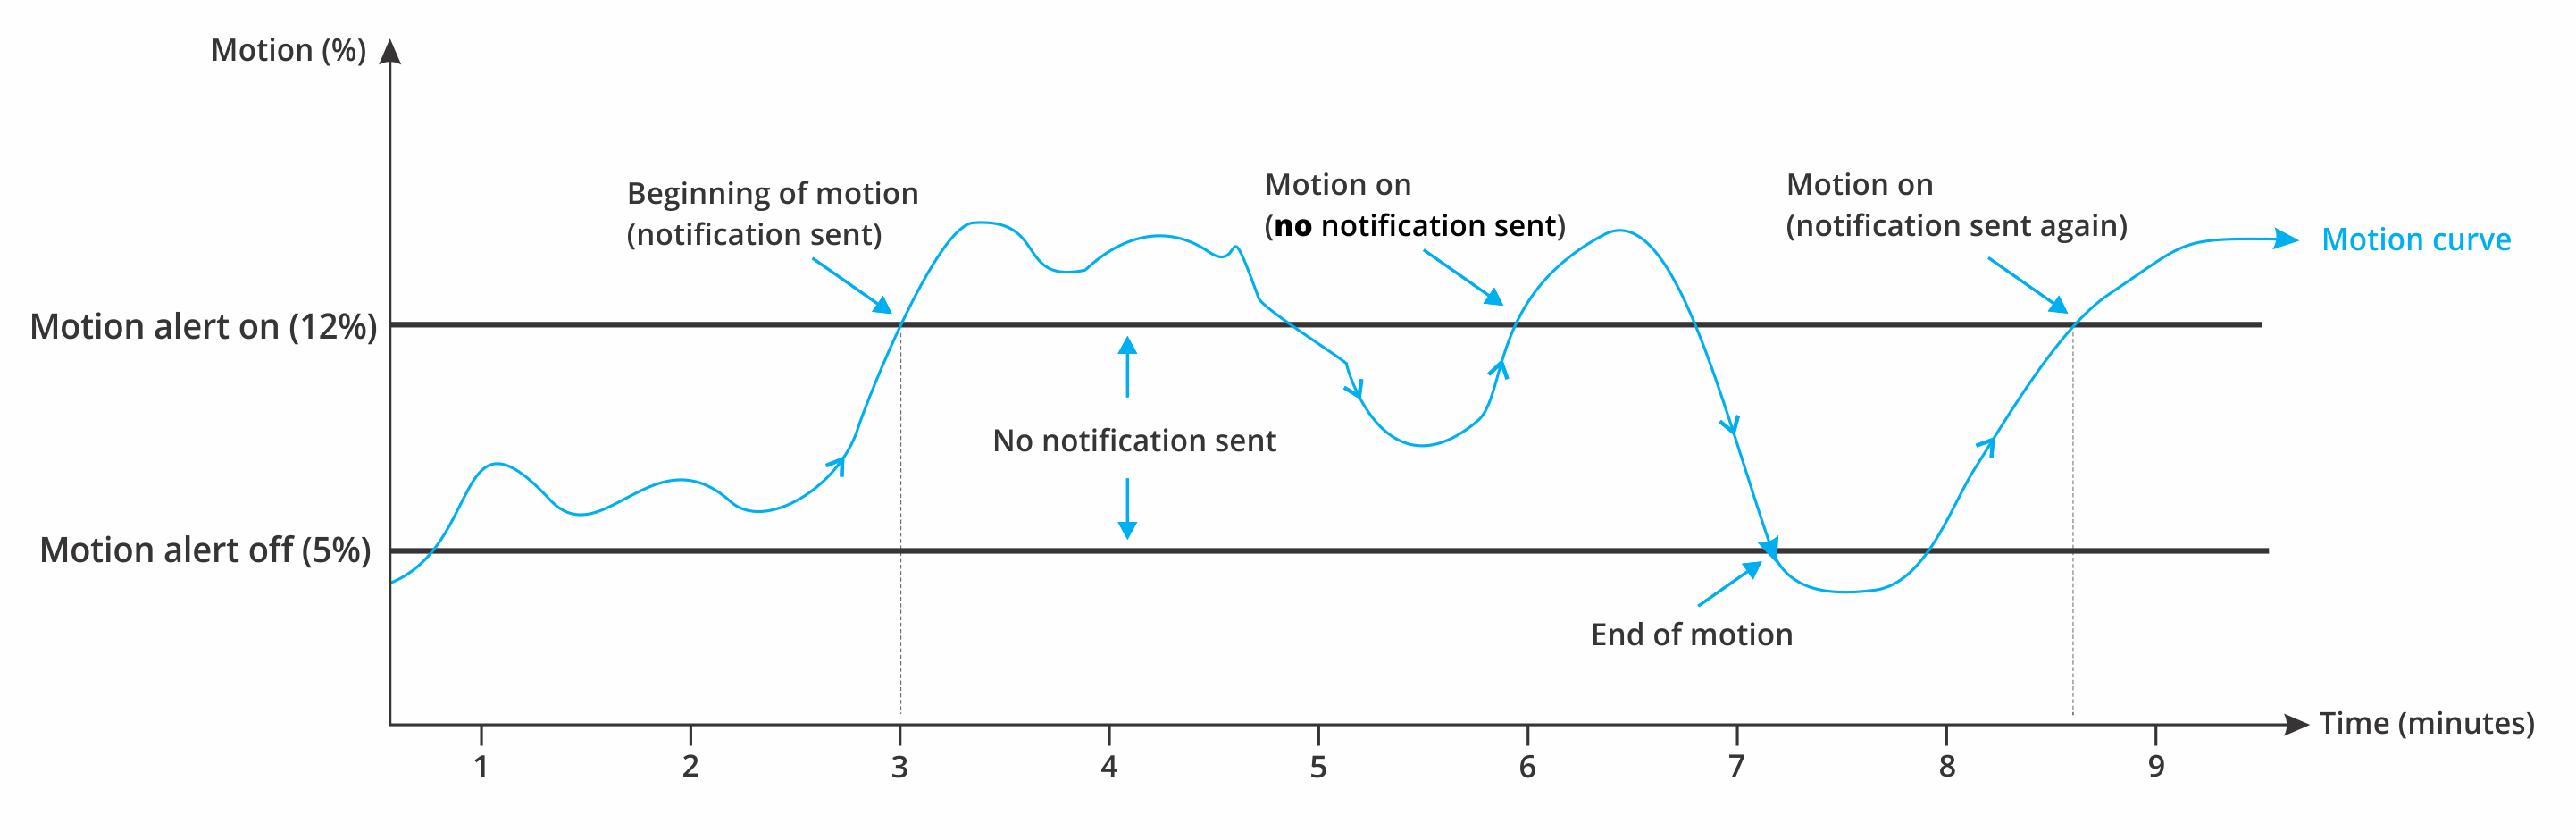 Diagram illustrating how motion detection alerts are triggered and when motion detection notifications are sent.